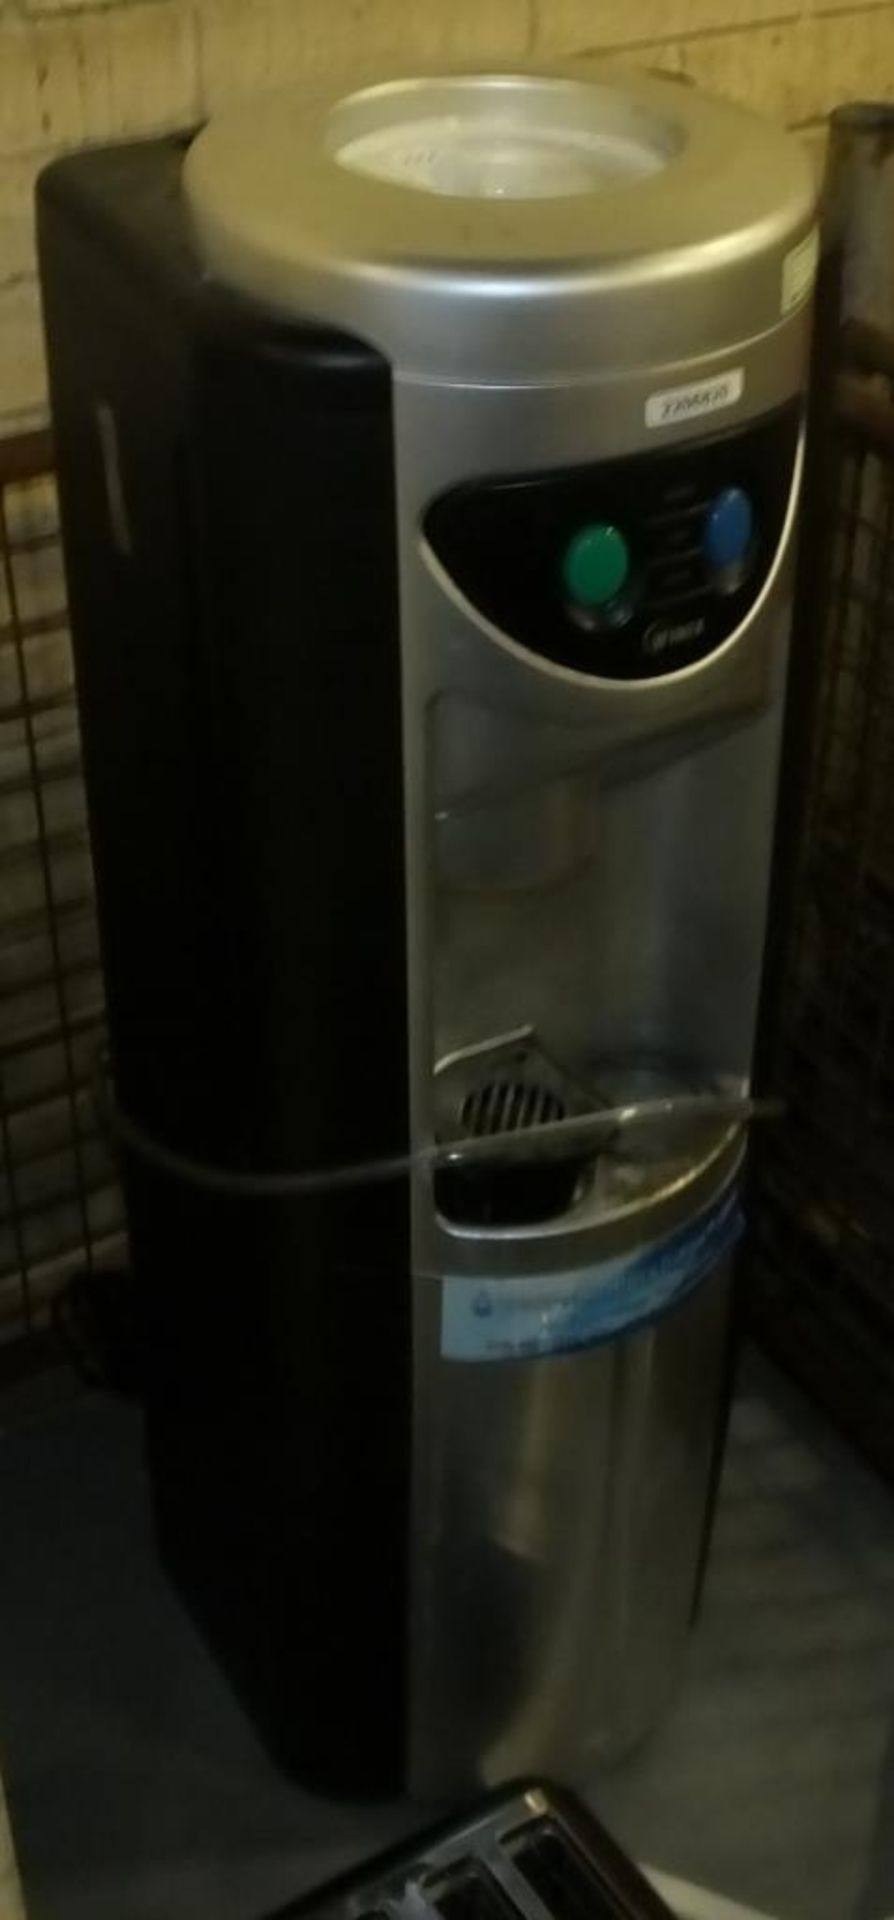 ECO-AIR Air Condition Unit, Winix Water Cooler, Electric Fan Unit, Morphy Richards Toaster - Image 3 of 5